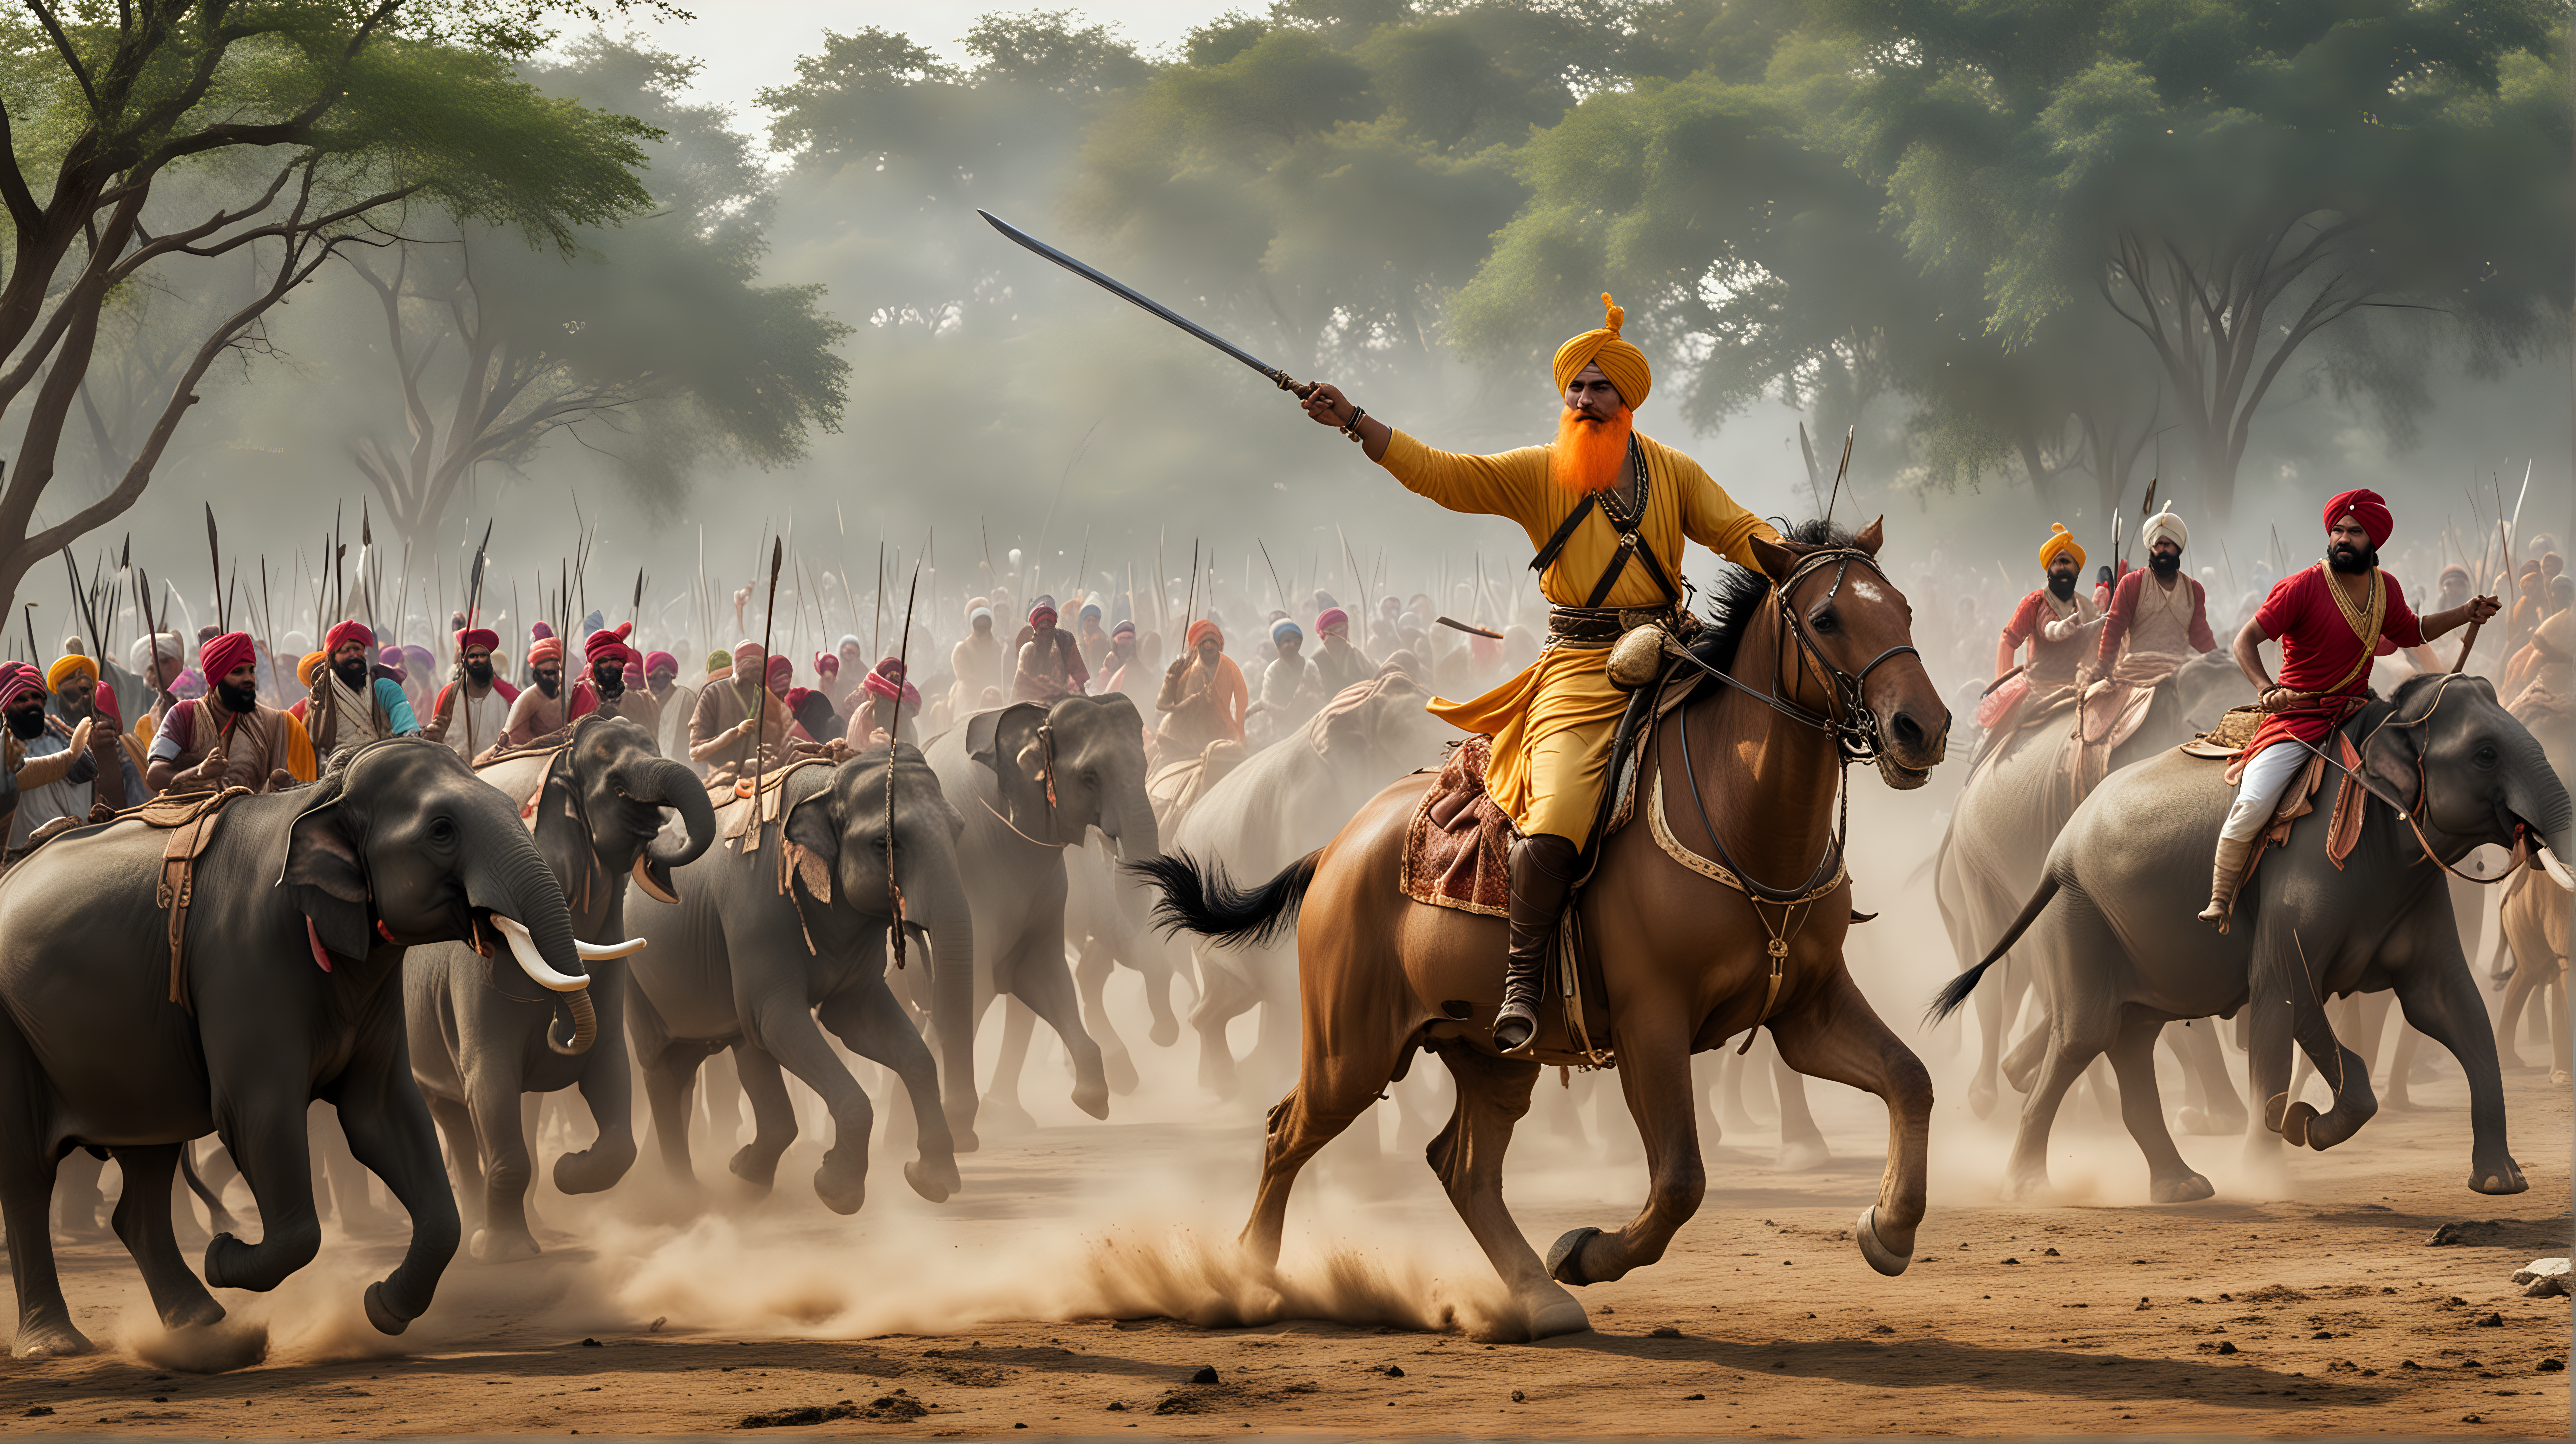 sikh warriors fighting on horse back against elephants and tigers and the moghul empire set 300 years ago in india